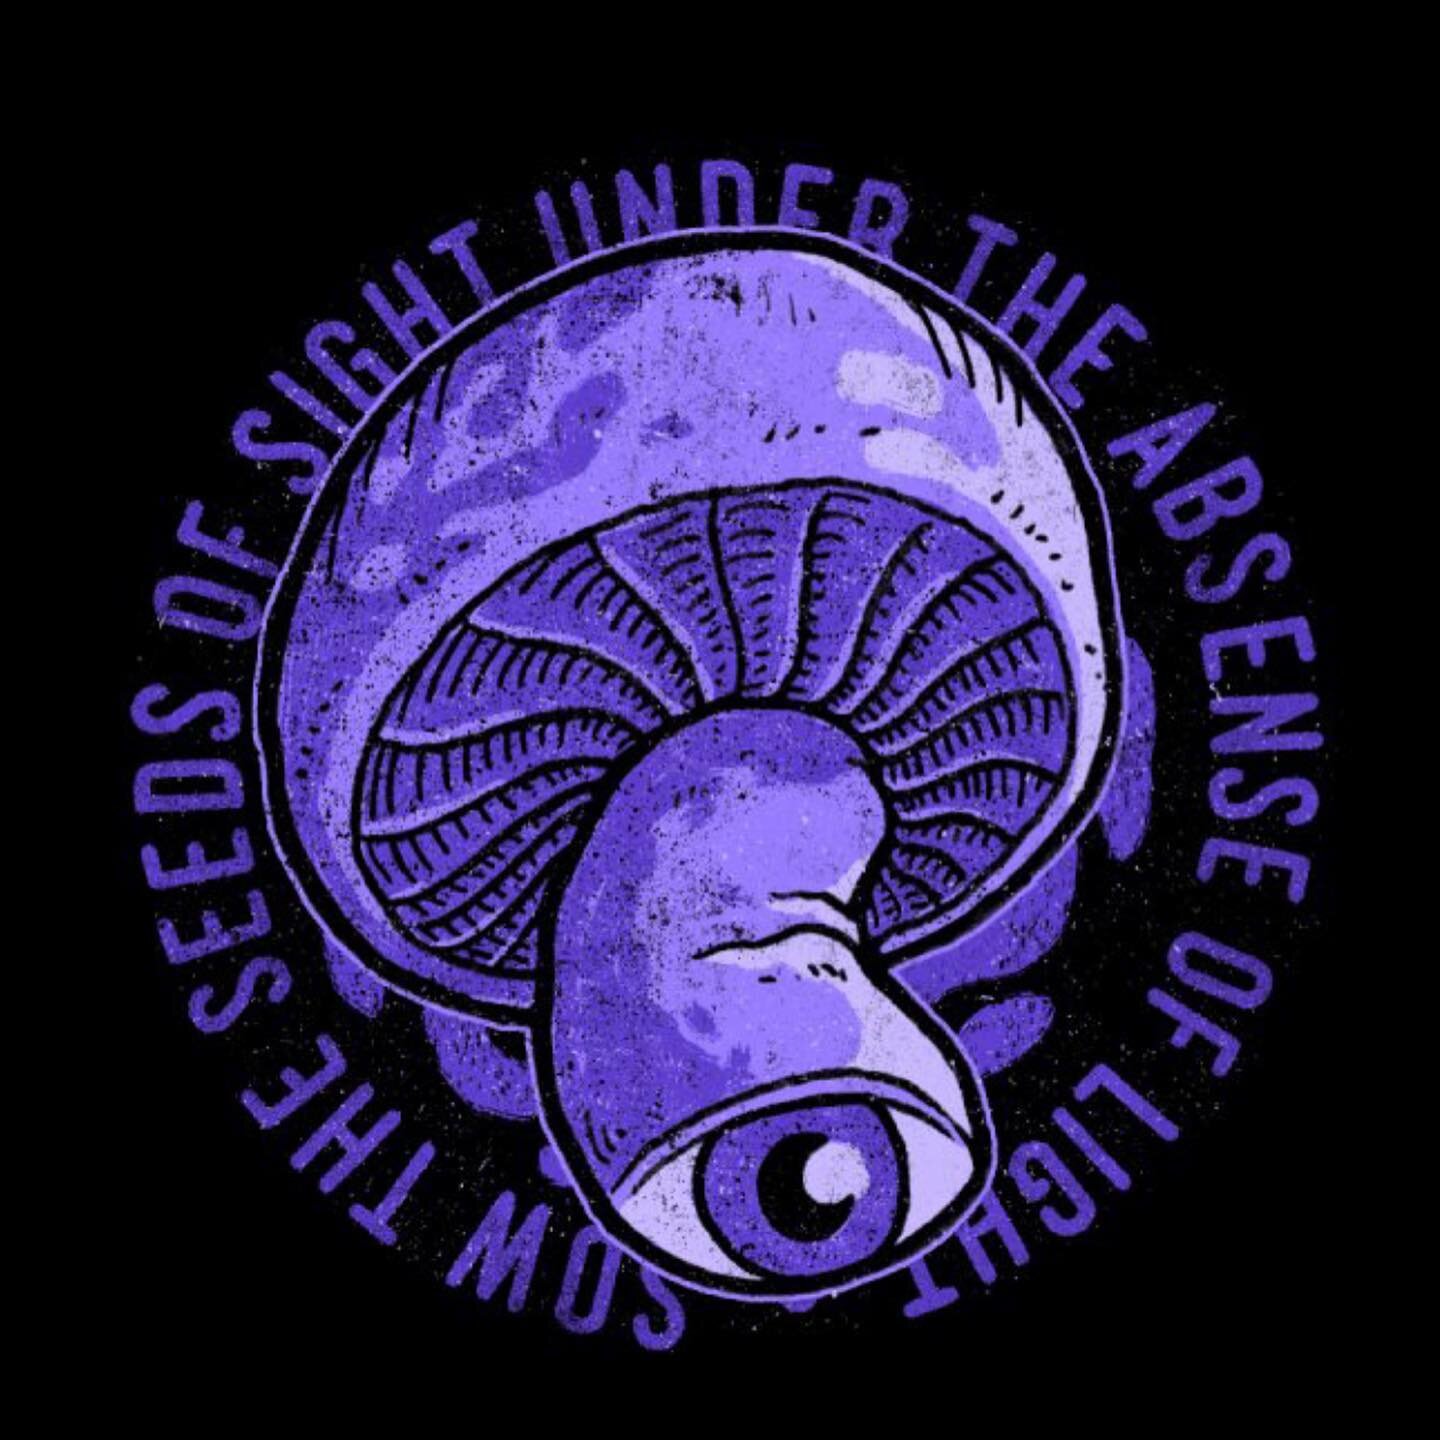 New shirt available in my store. Do drugs and be poorly influenced. This is the only time I&rsquo;ve liked purple.

#mushrooms #shirtdesign #texture #buythis #shirtstore #apparel #clothingbrand #shroomfest #shroomfest2021 #eyeball #illustration #draw